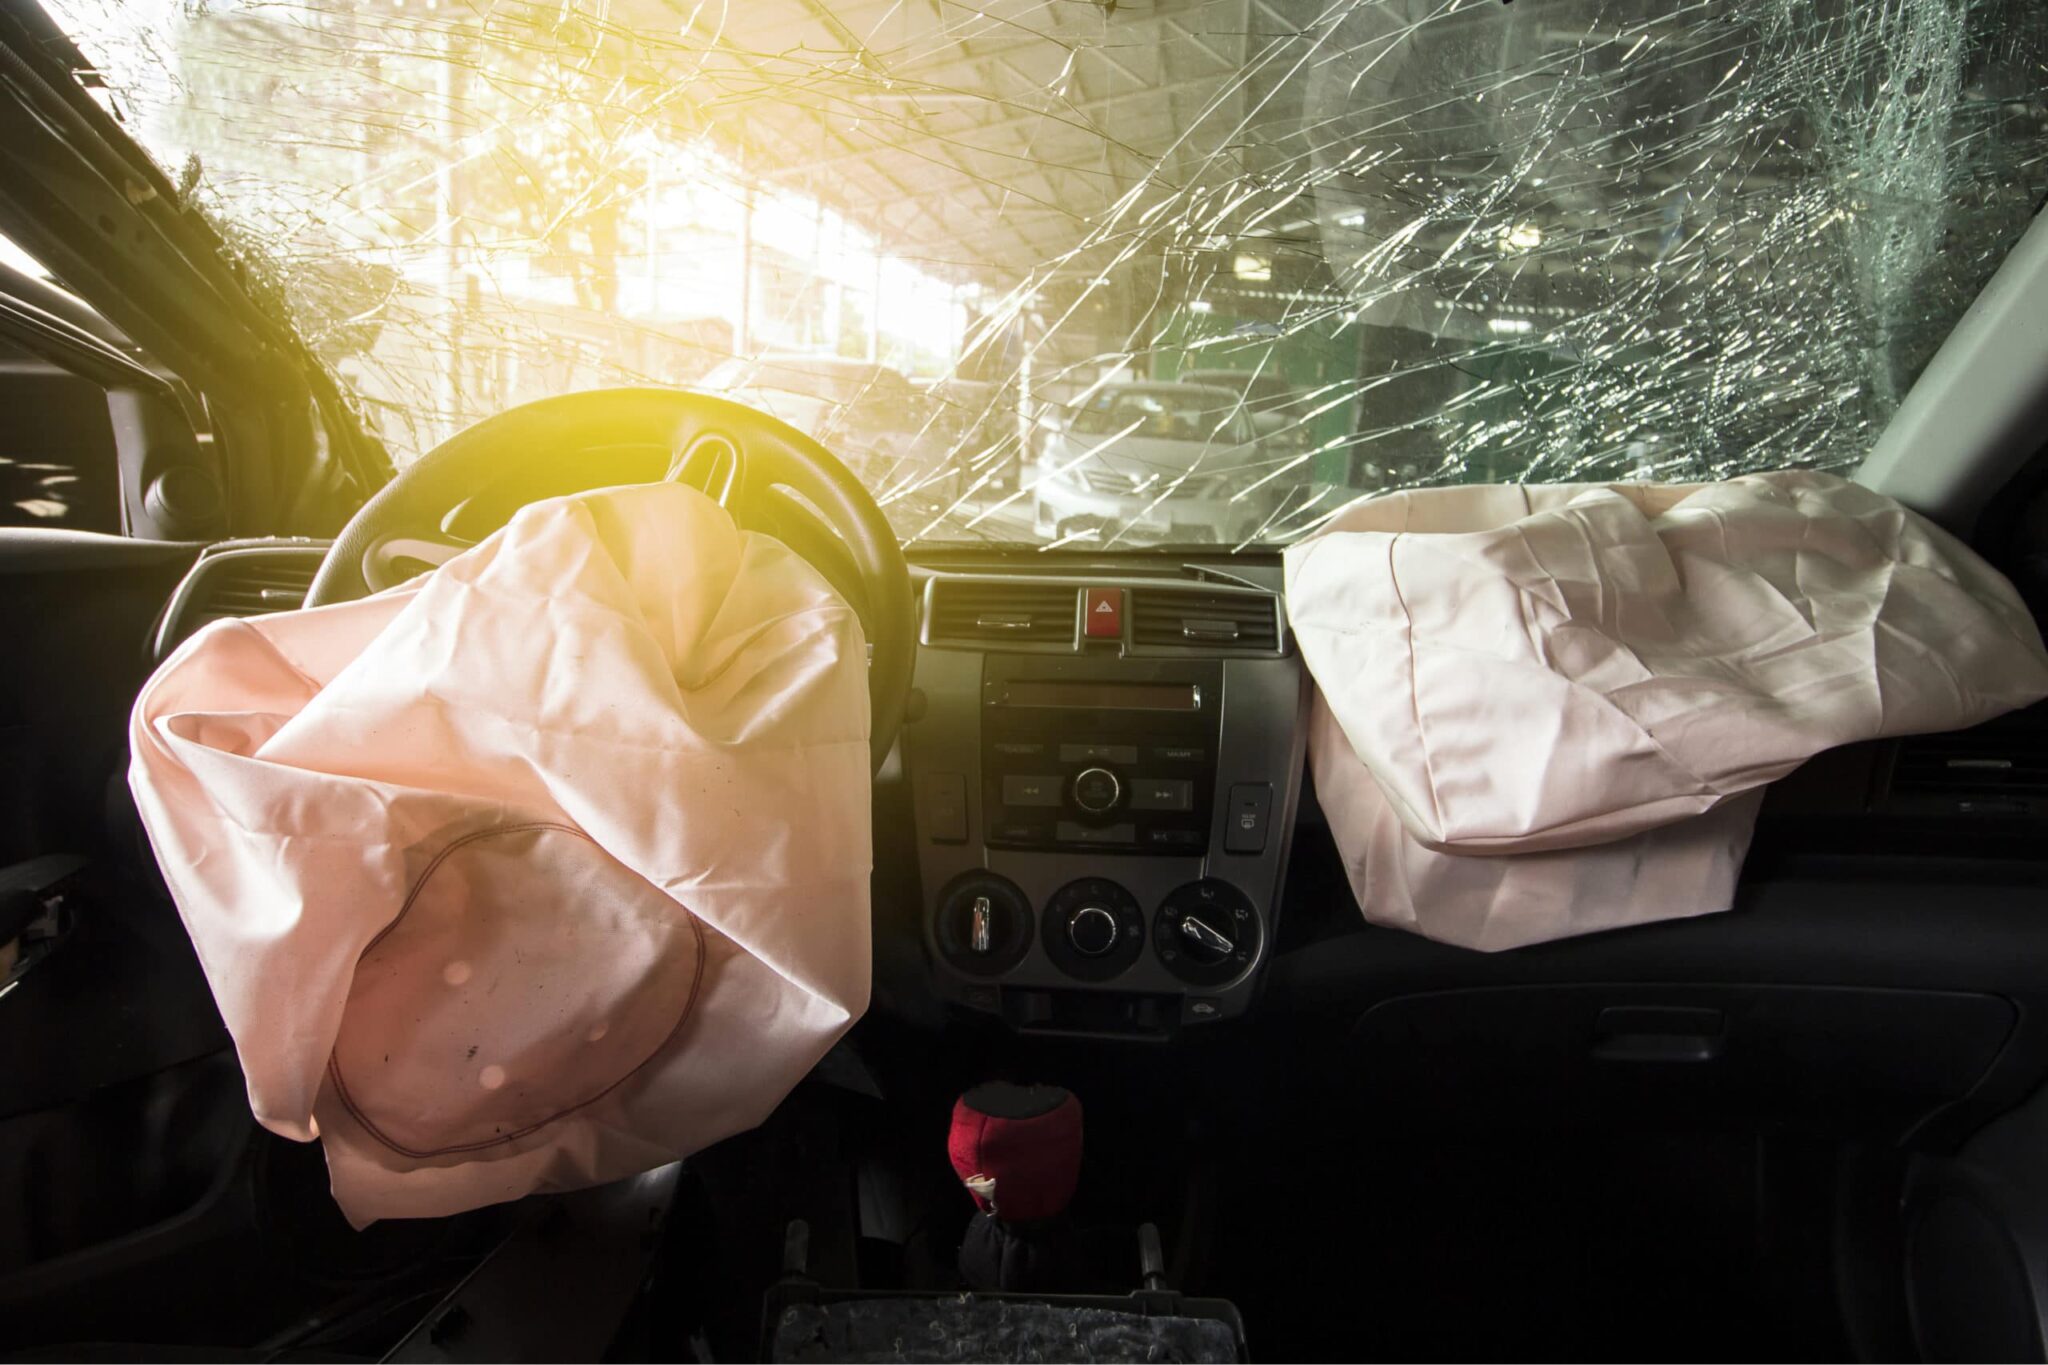 Takata Airbags: Dangerous Defects and What to Do About Them